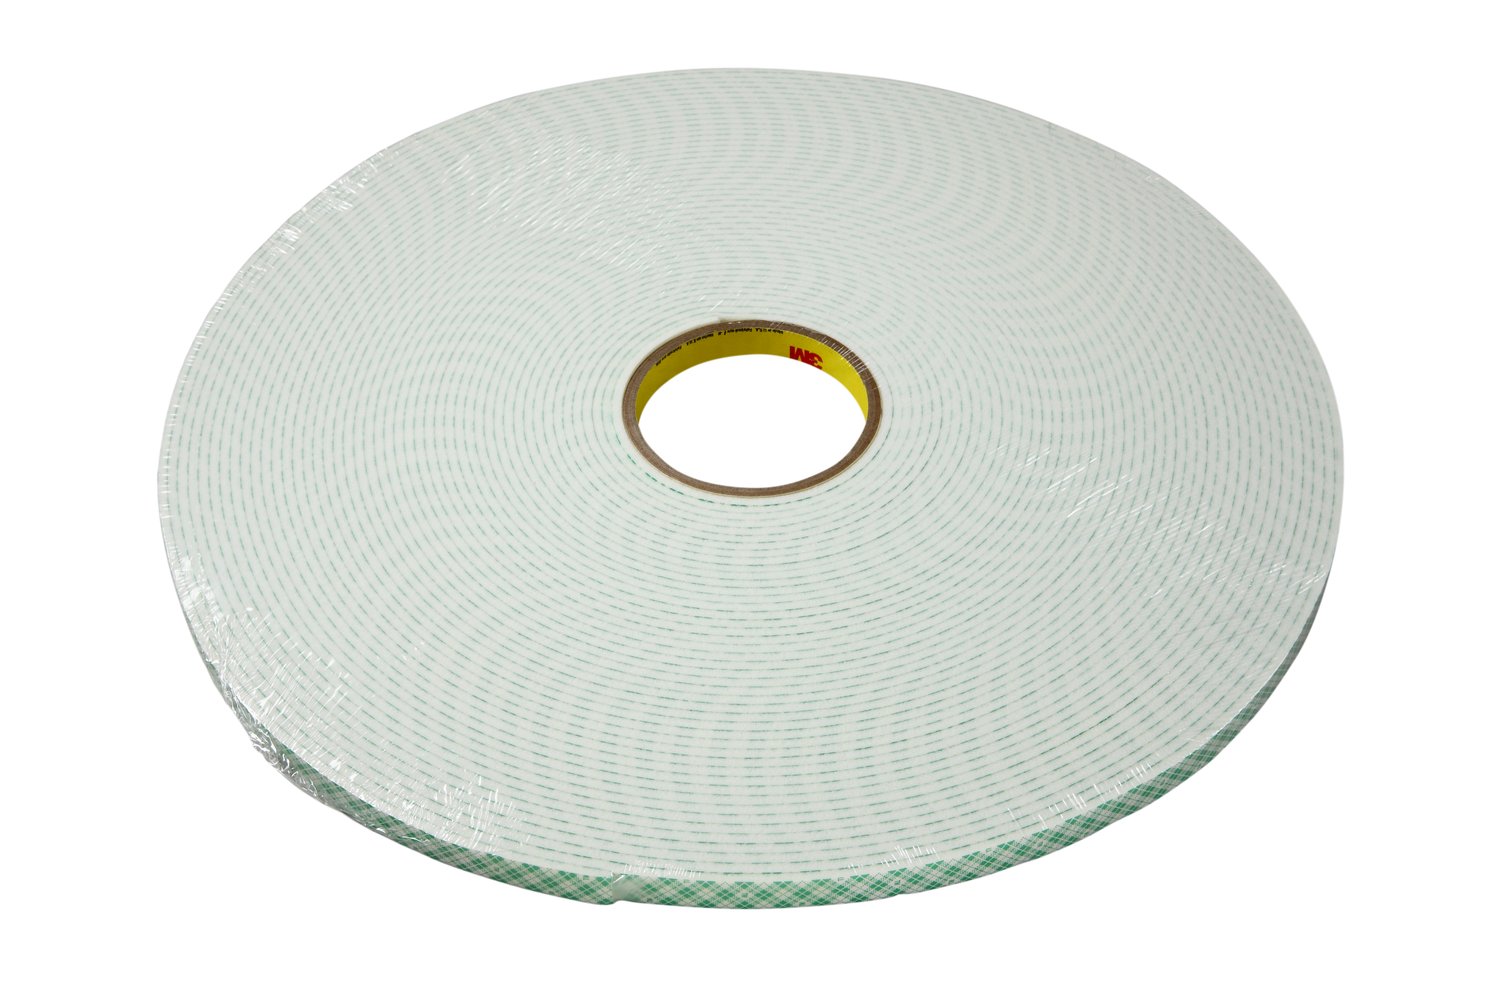 7000048431 - 3M Double Coated Urethane Foam Tape 4008, Off White, 2 in x 36 yd, 125
mil, 6 rolls per case